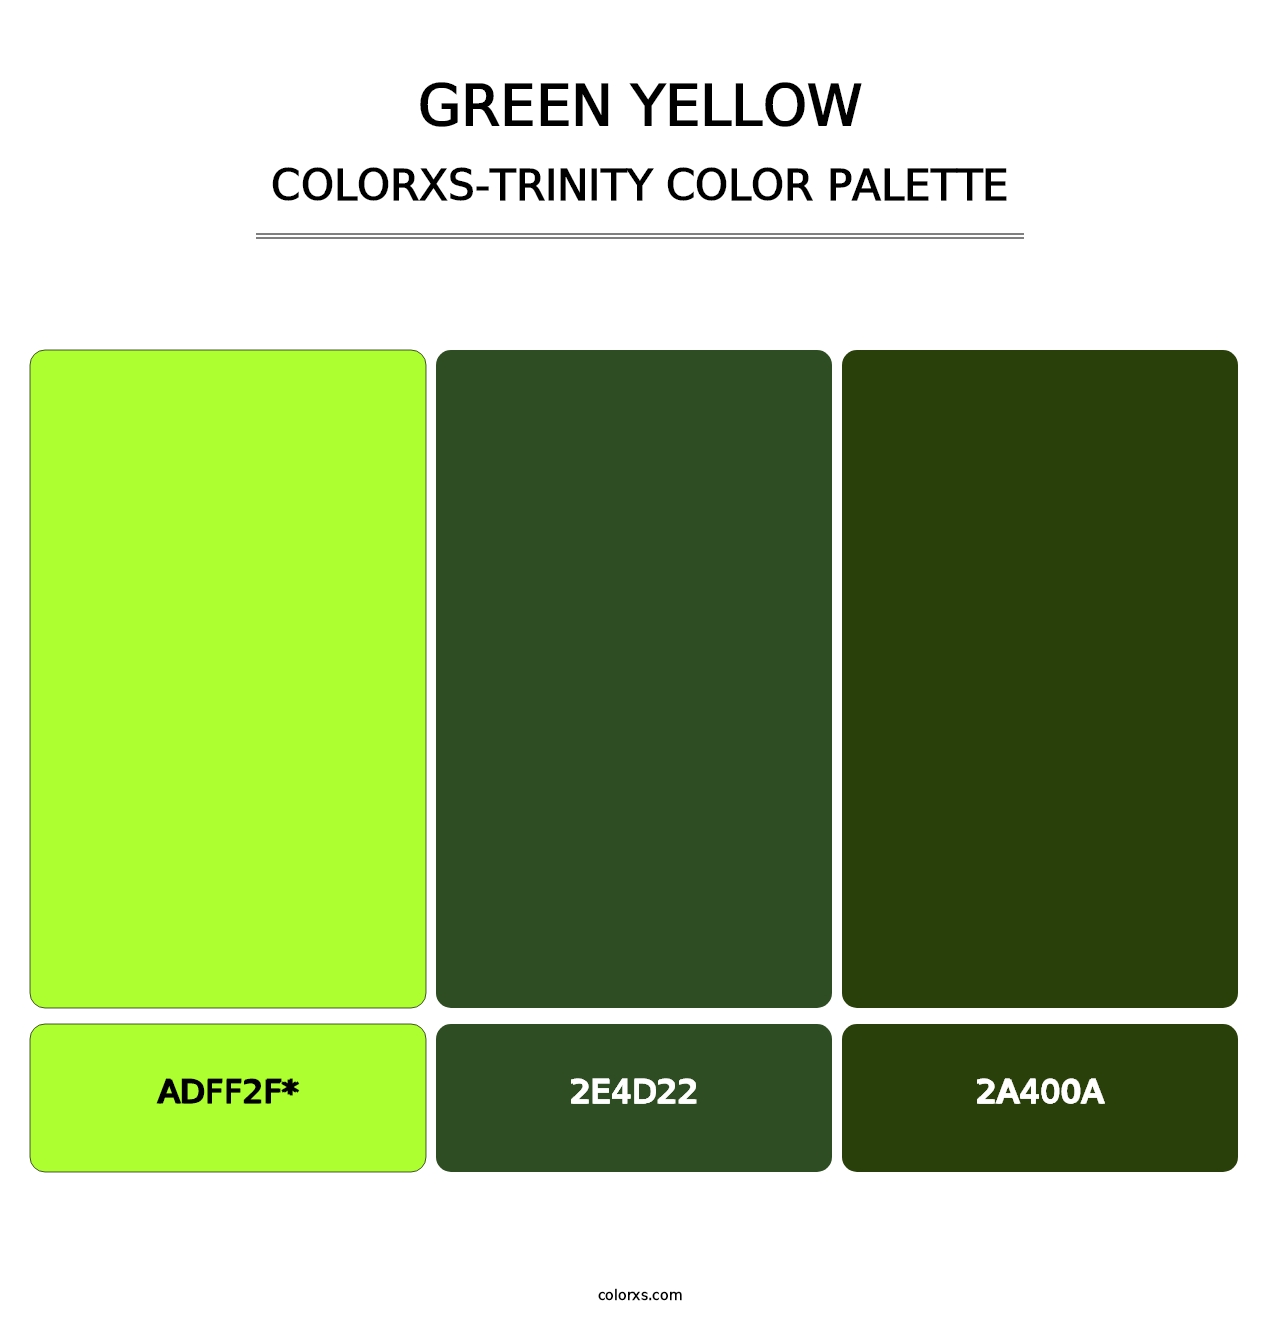 Green Yellow - Colorxs Trinity Palette